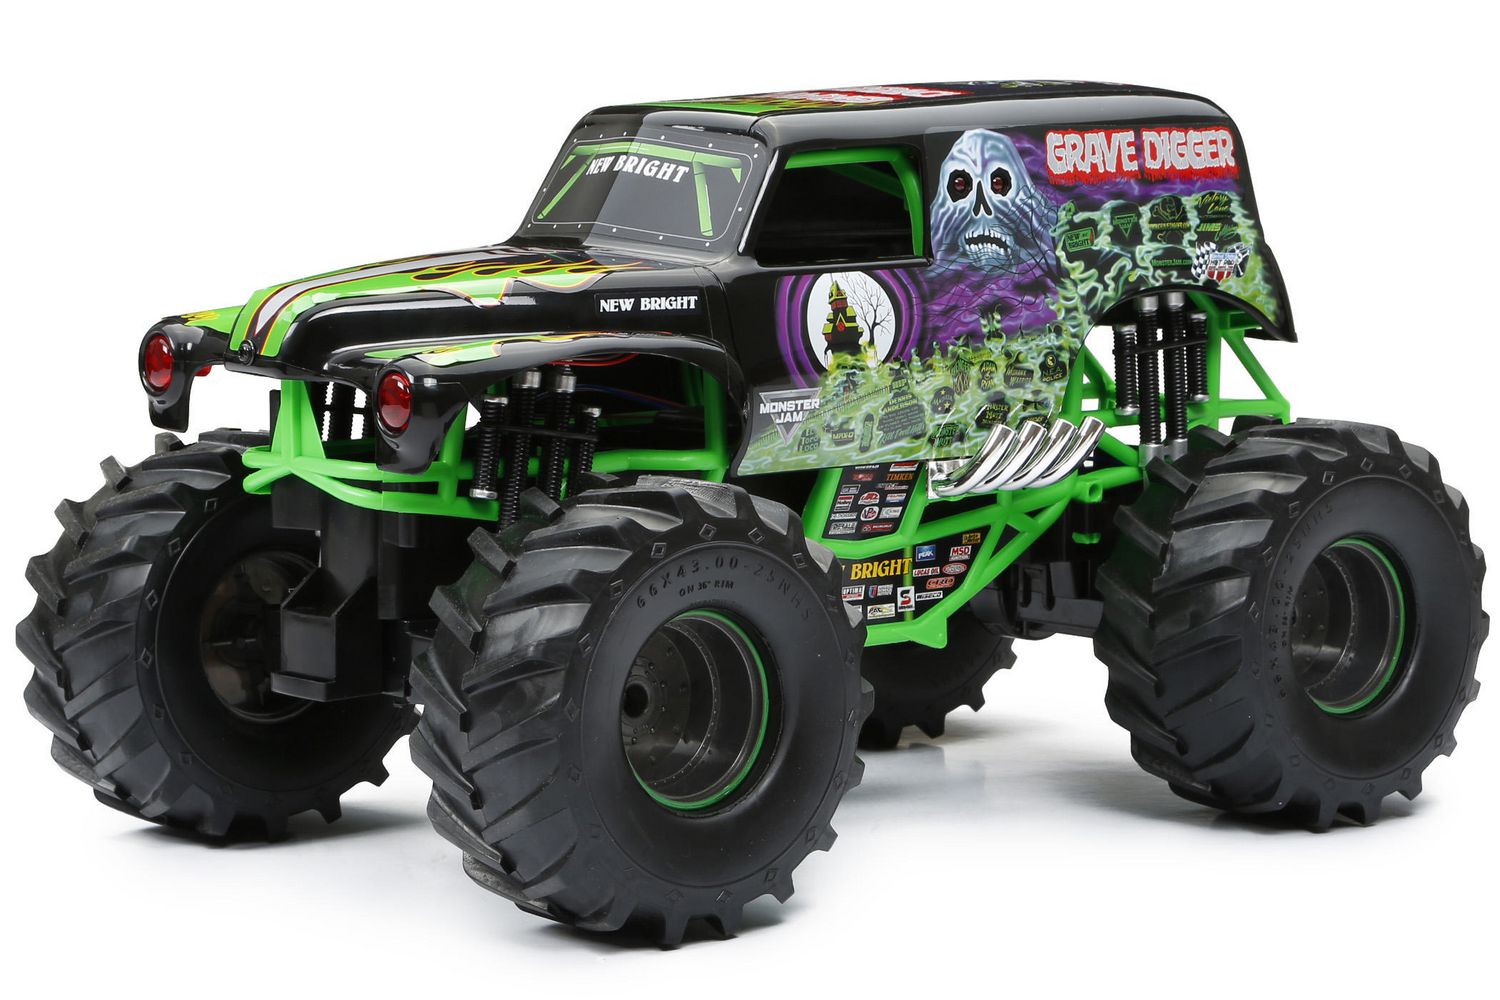 Scale Rc Monster Jam Grave Digger Full Function Walk Around Video | My ...